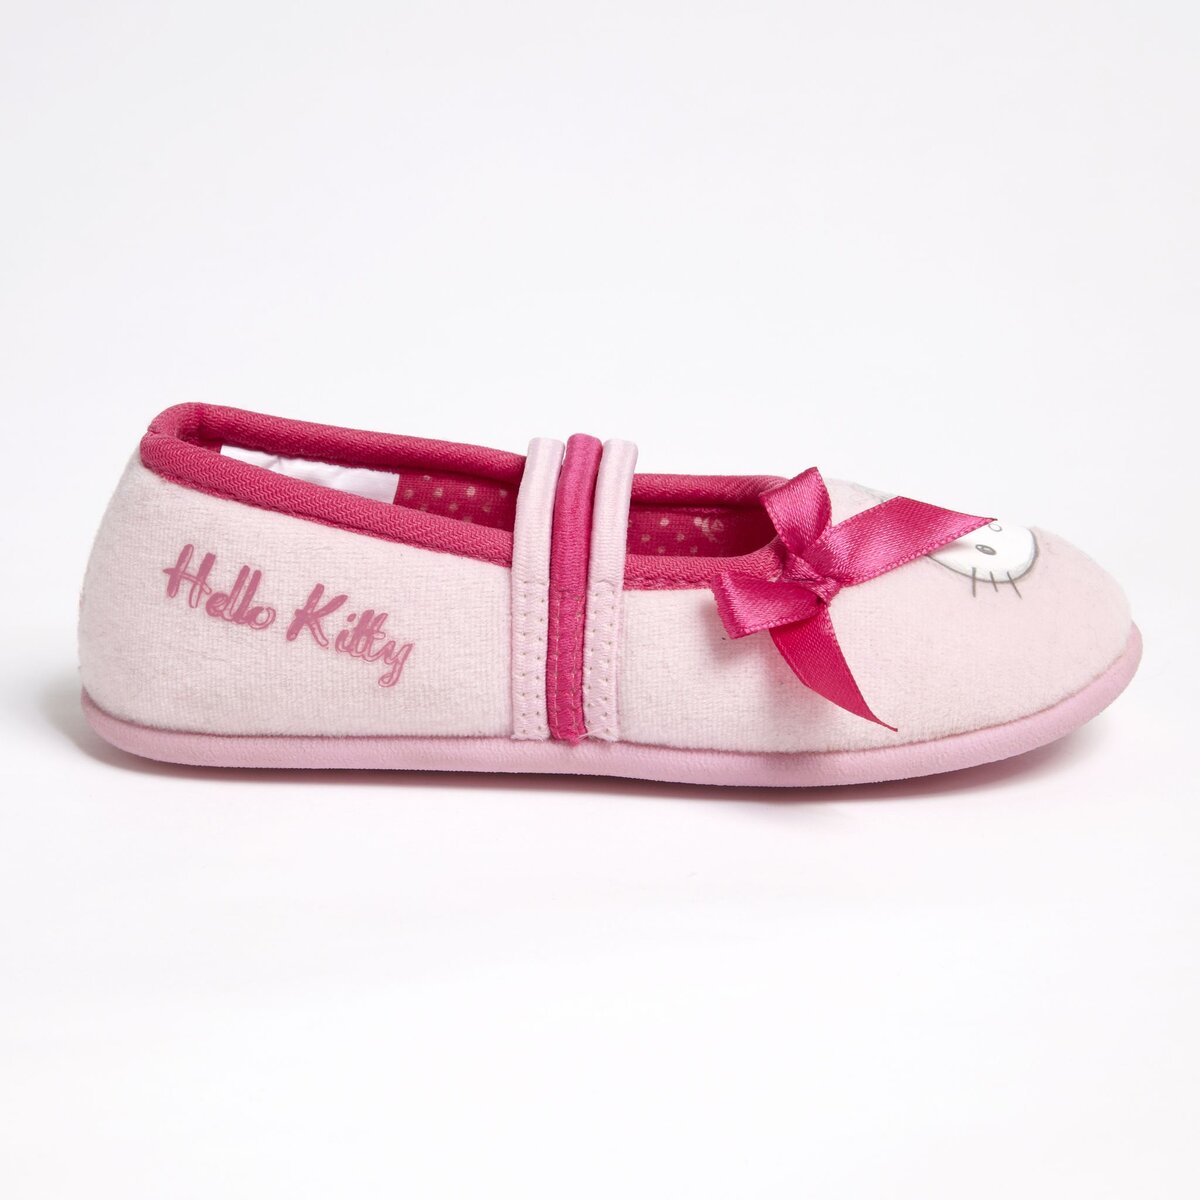 HELLO KITTY Chaussons fille du 24 au 34